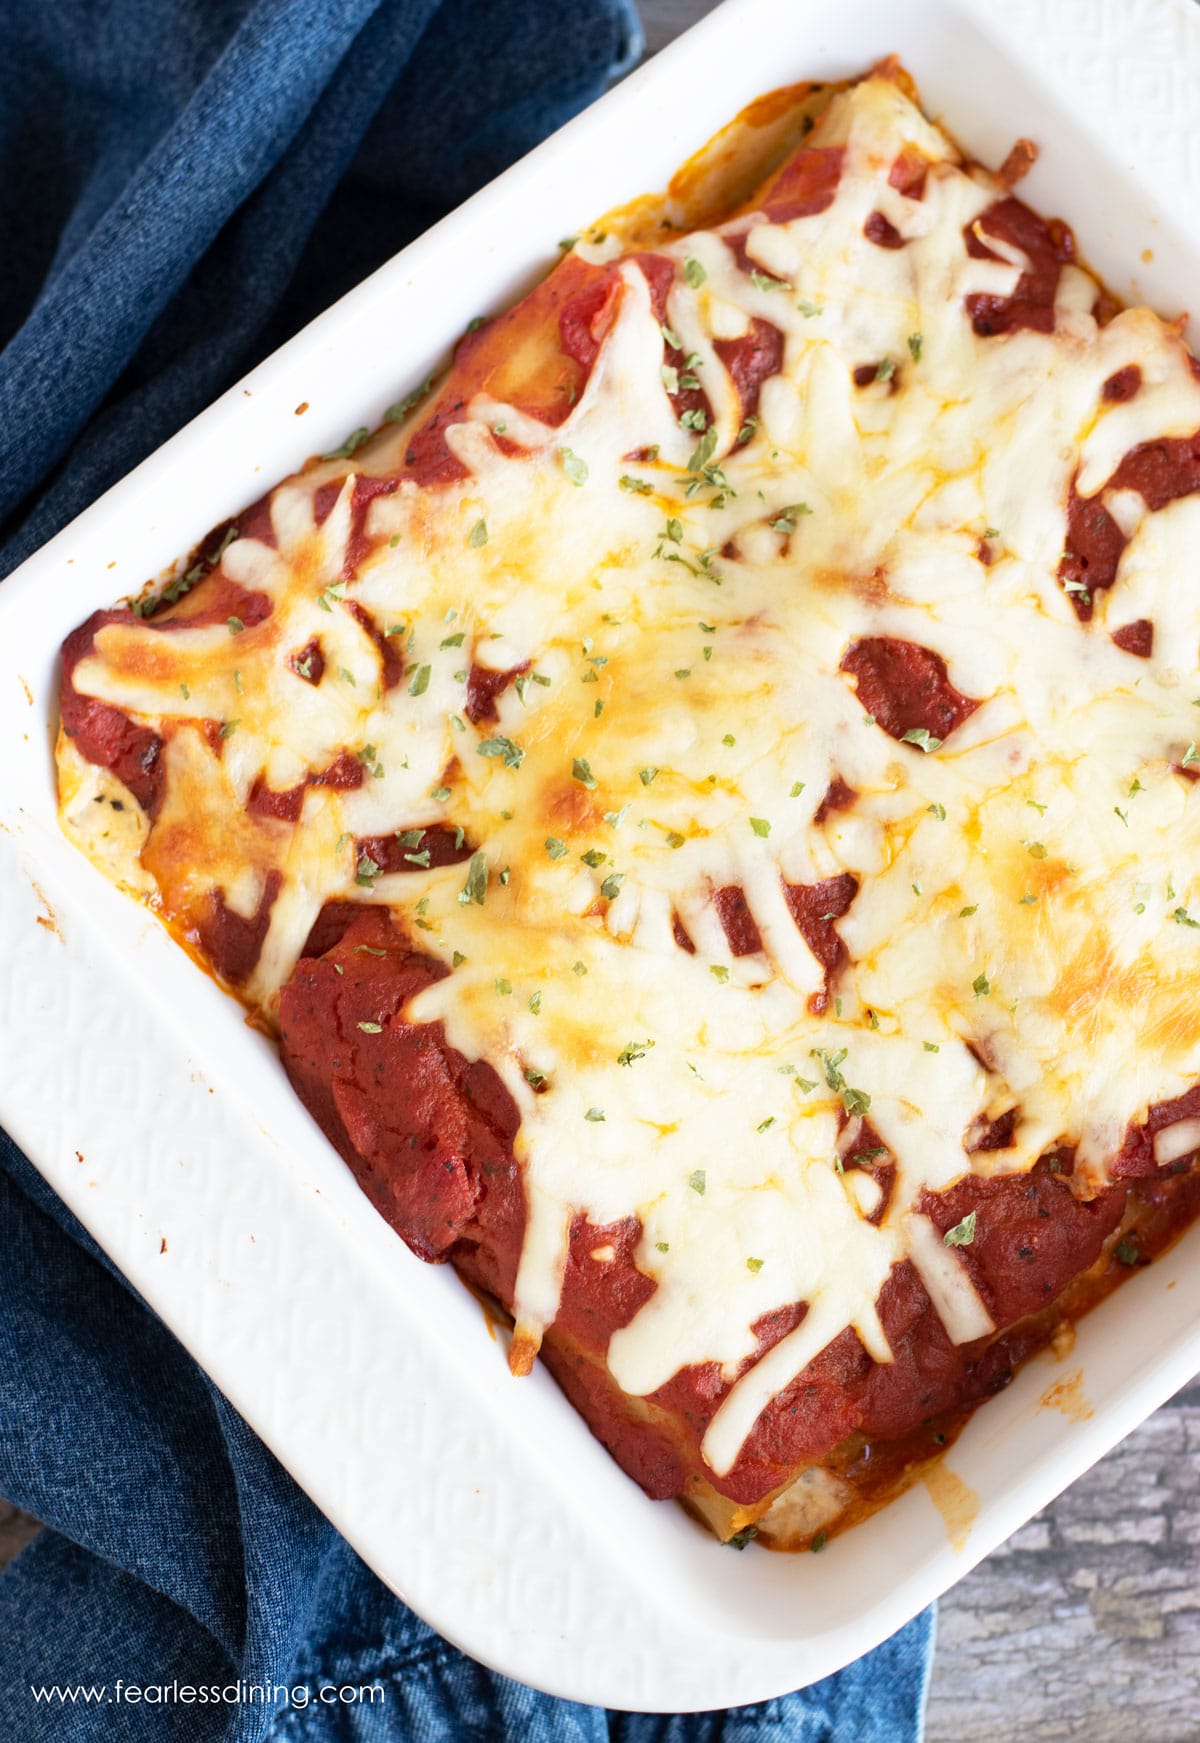 An 8x8 white baking dish filled with baked manicotti.